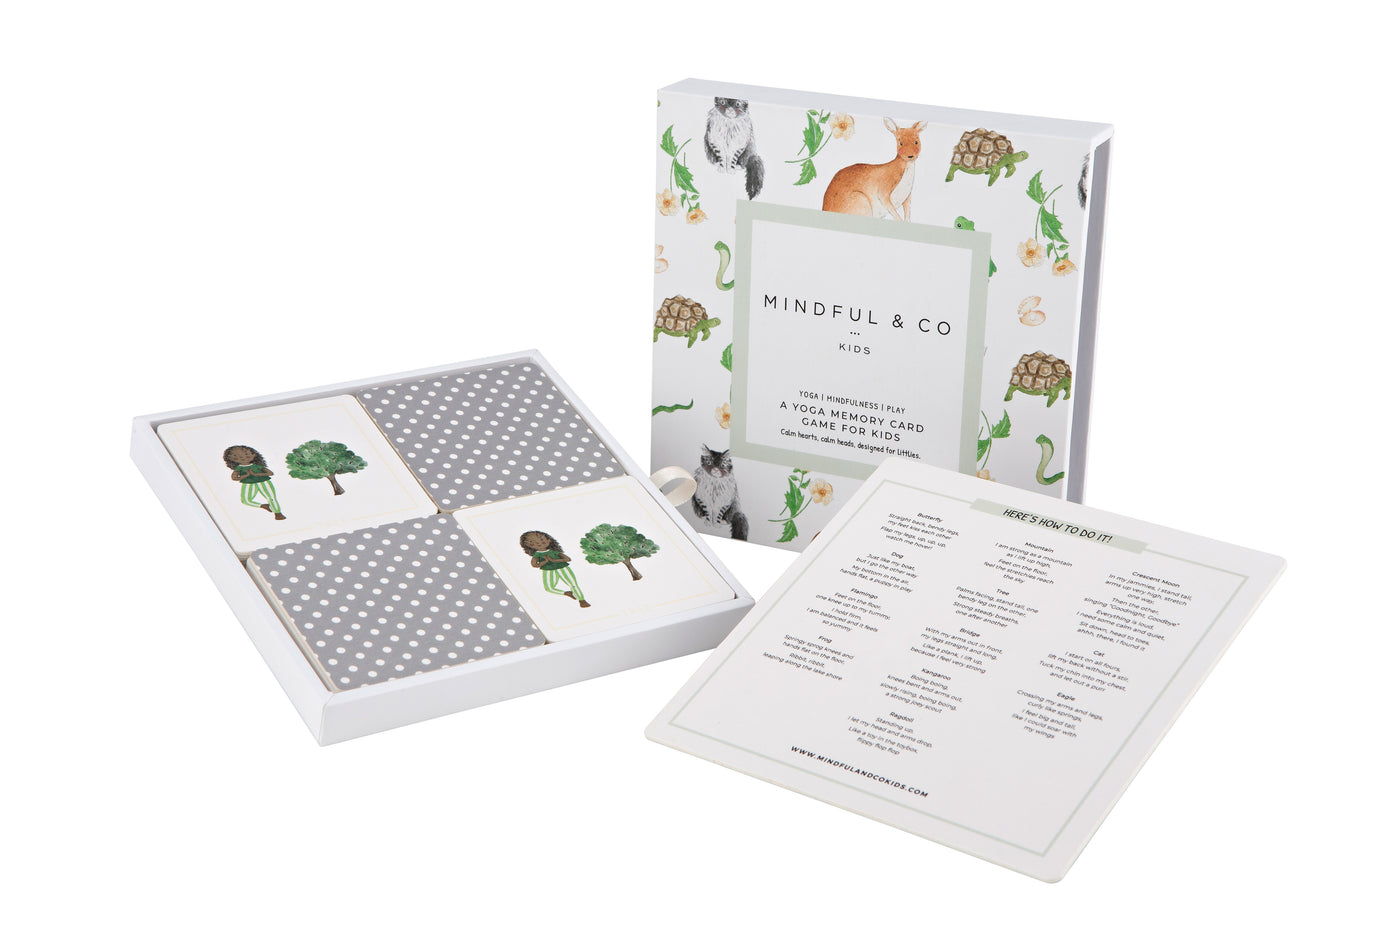 Mindful & Co Kids Yoga Memory Card Game contents